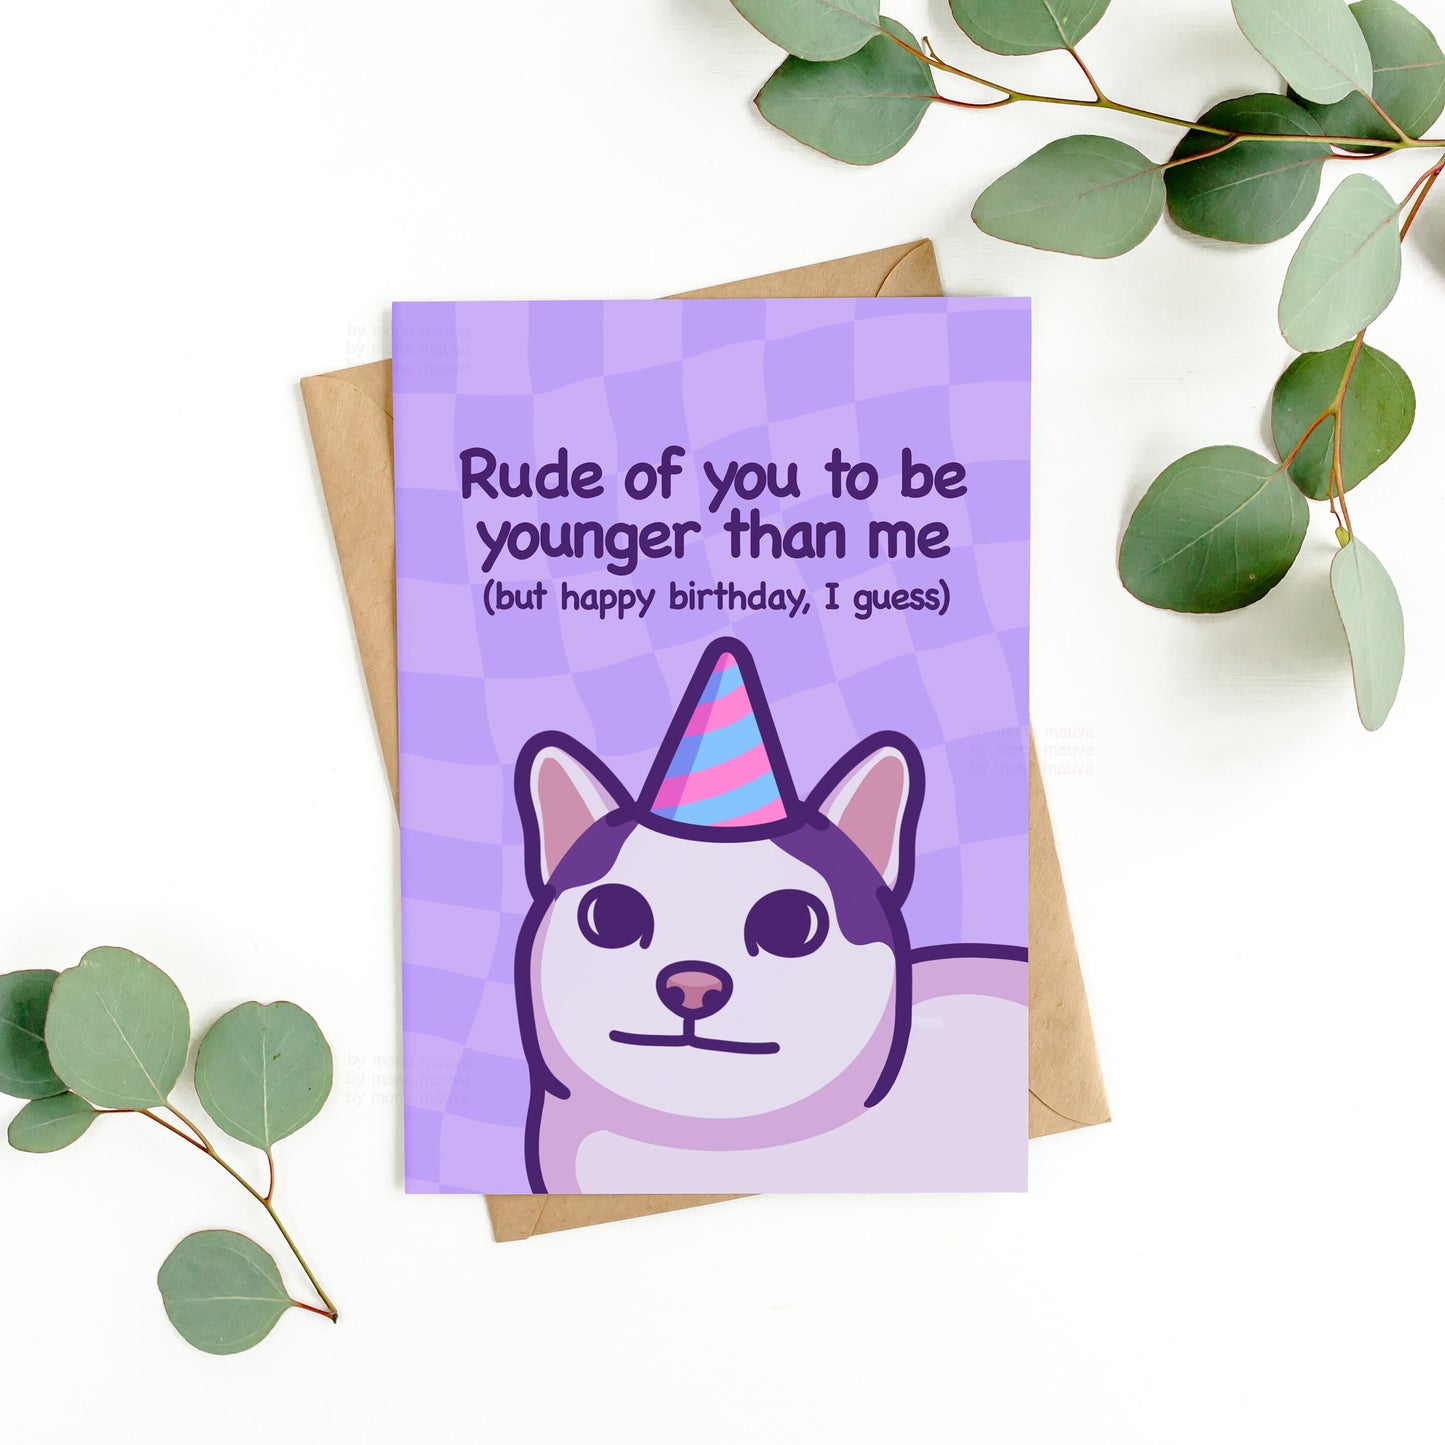 Funny Cat Birthday Card | Rude of You to Be Younger Than Me but Happy Birthday | Humorous Birthday Gift for Someone Younger - Her or Him